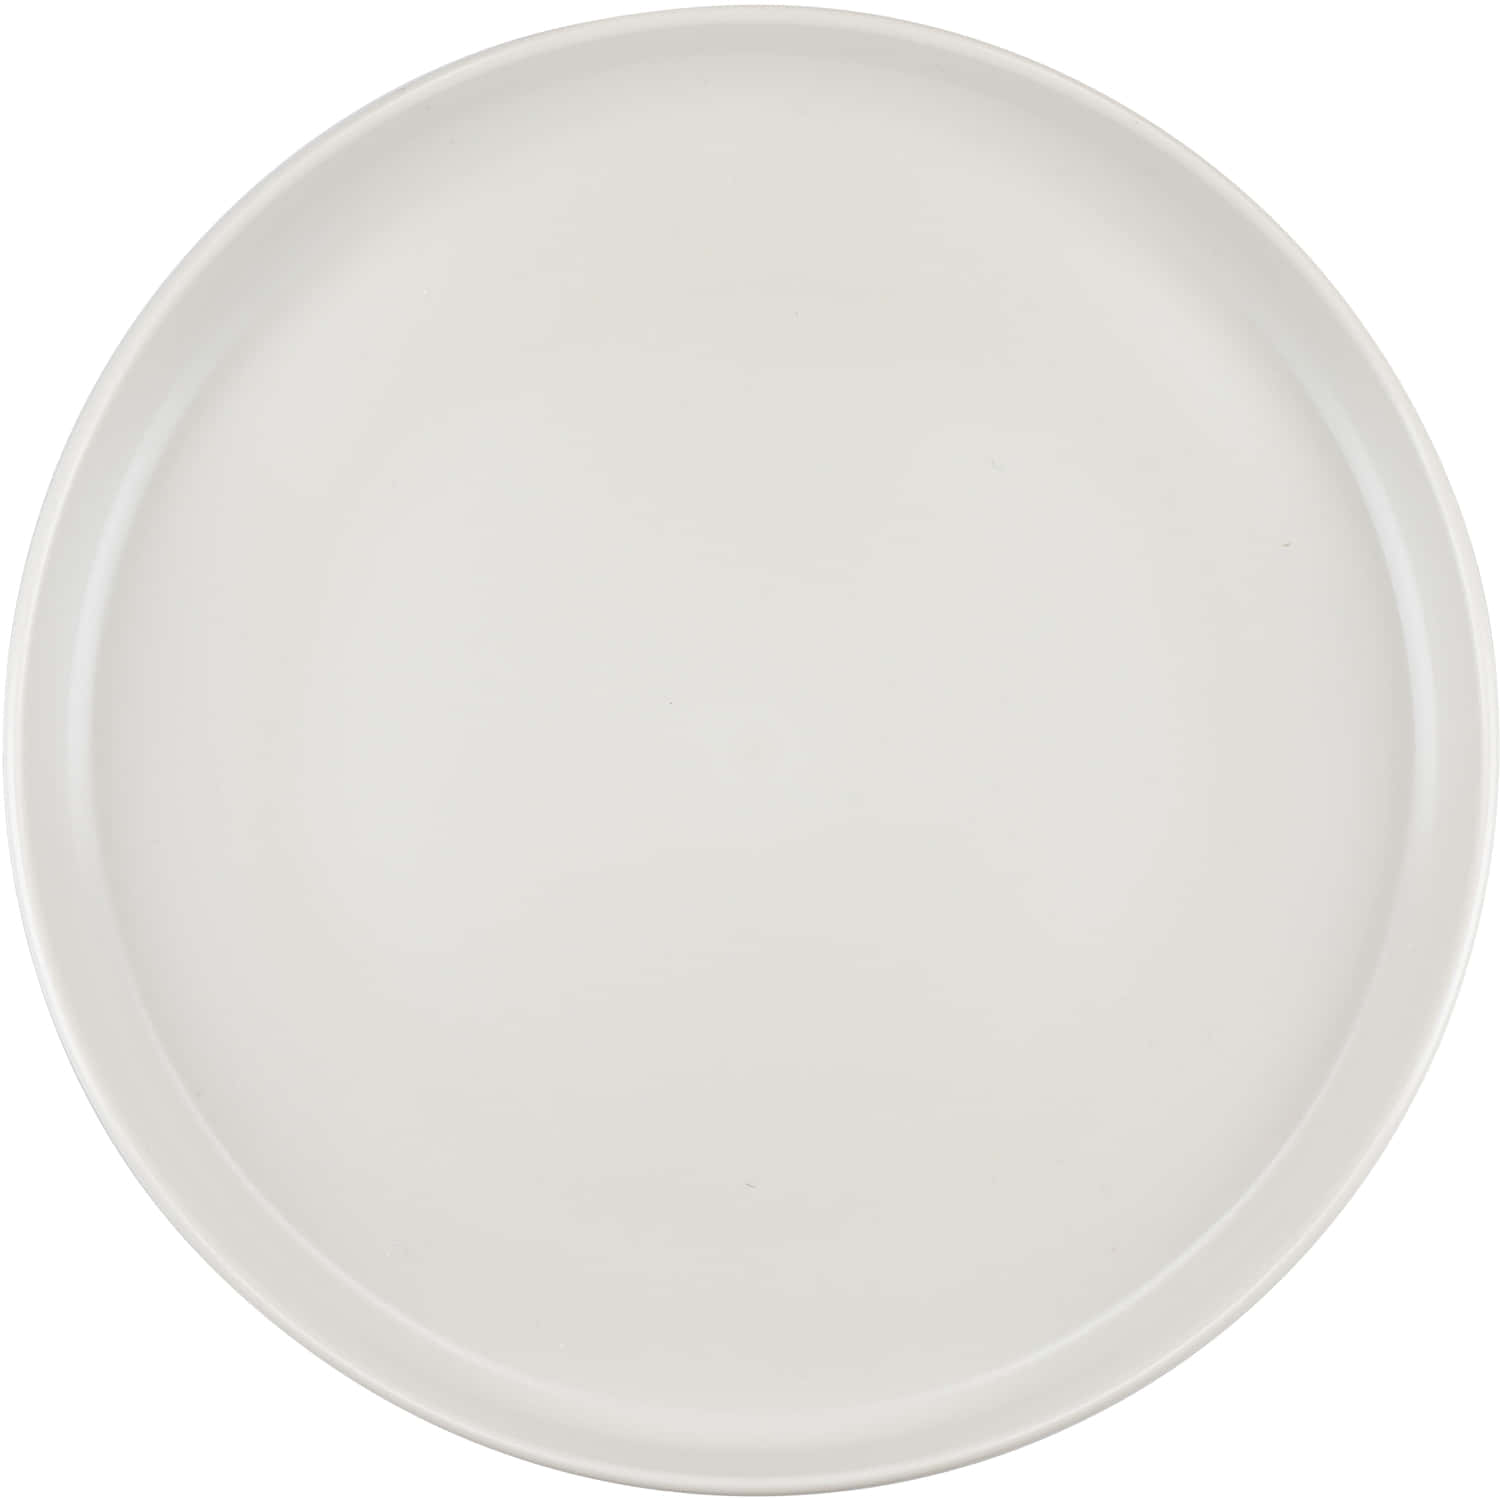 Mikasa Eco-Friendly Recycled Plastic Side Plates Set of Four 20cm